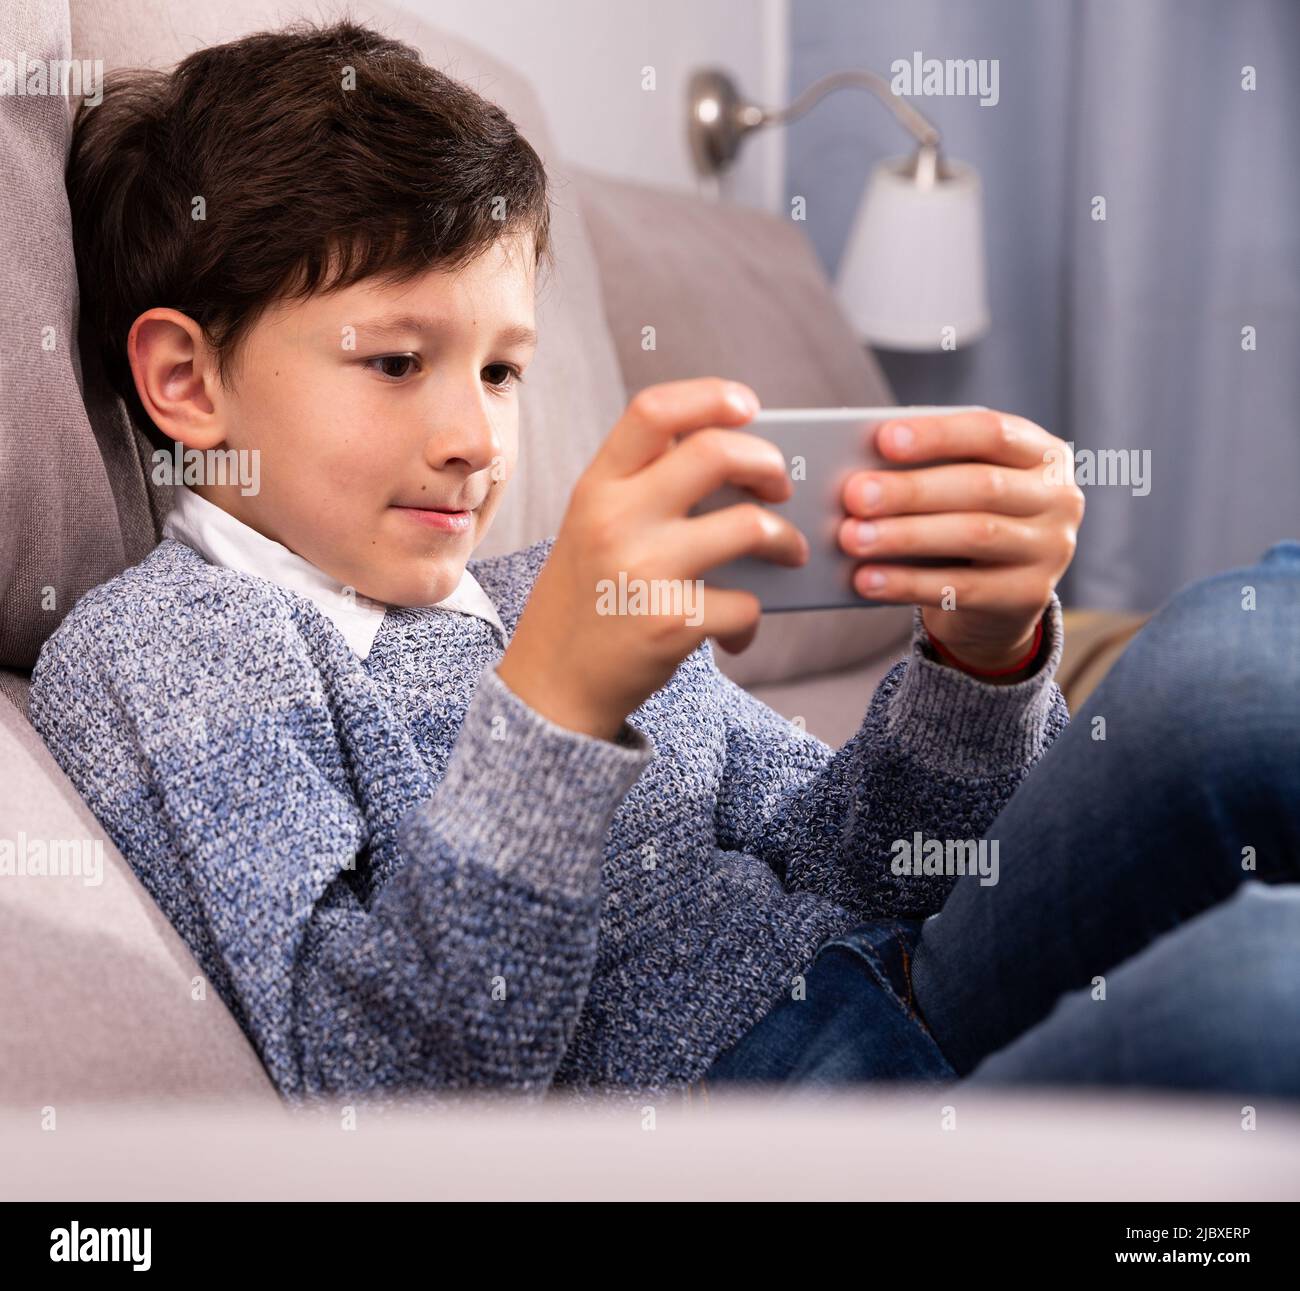 Teenager plays on smartphone in home interior Stock Photo